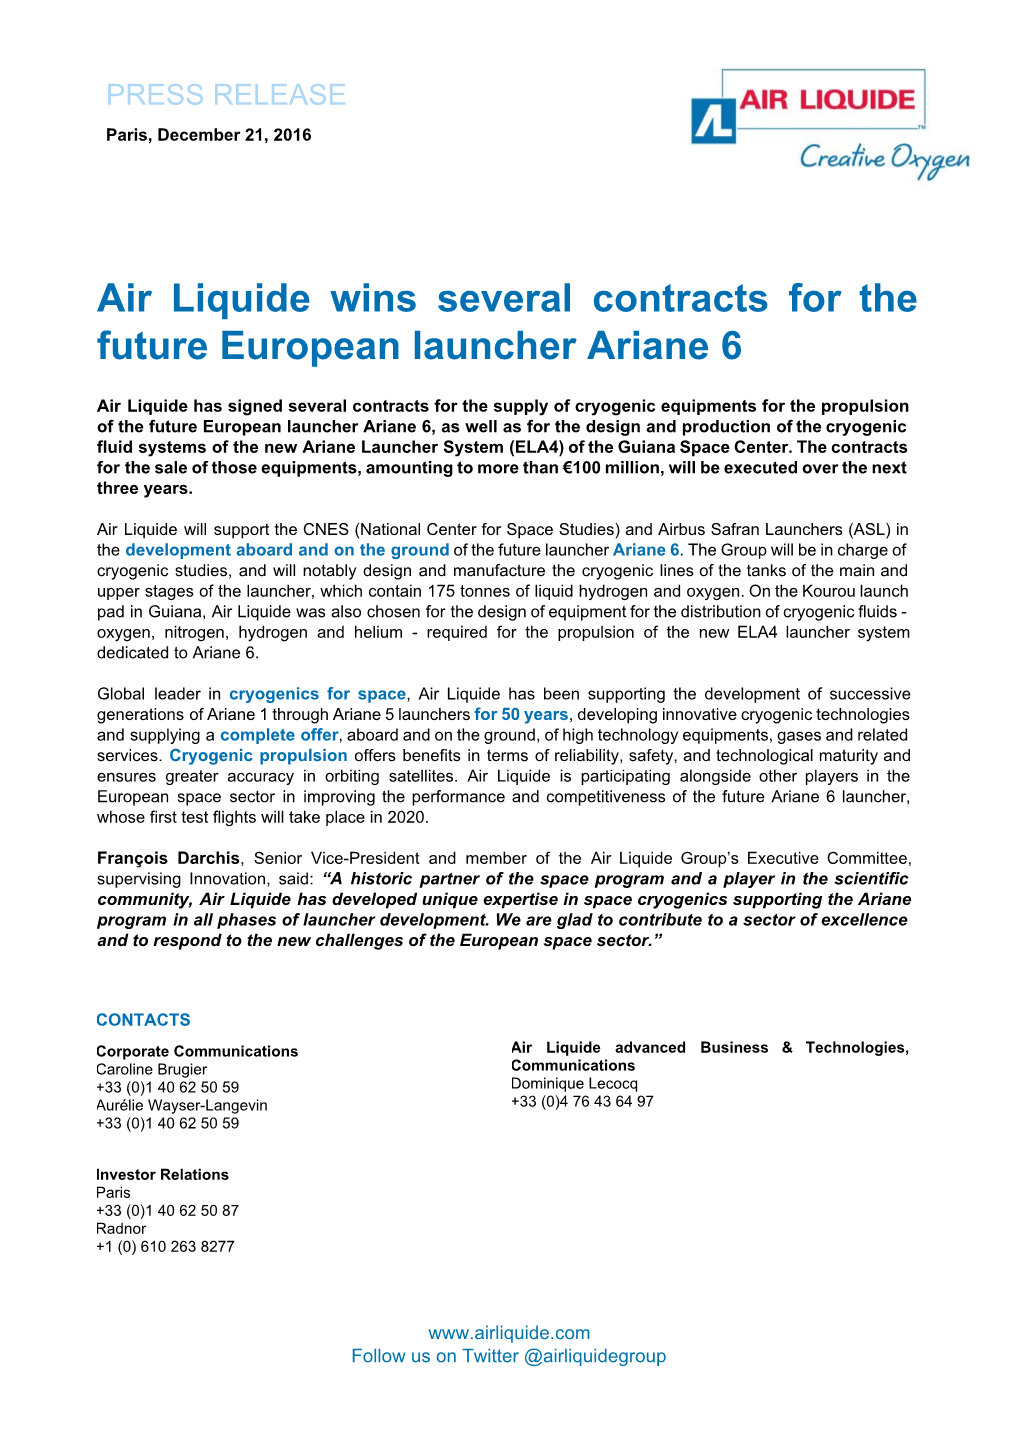 Air Liquide Wins Several Contracts for the Future European Launcher Ariane 6